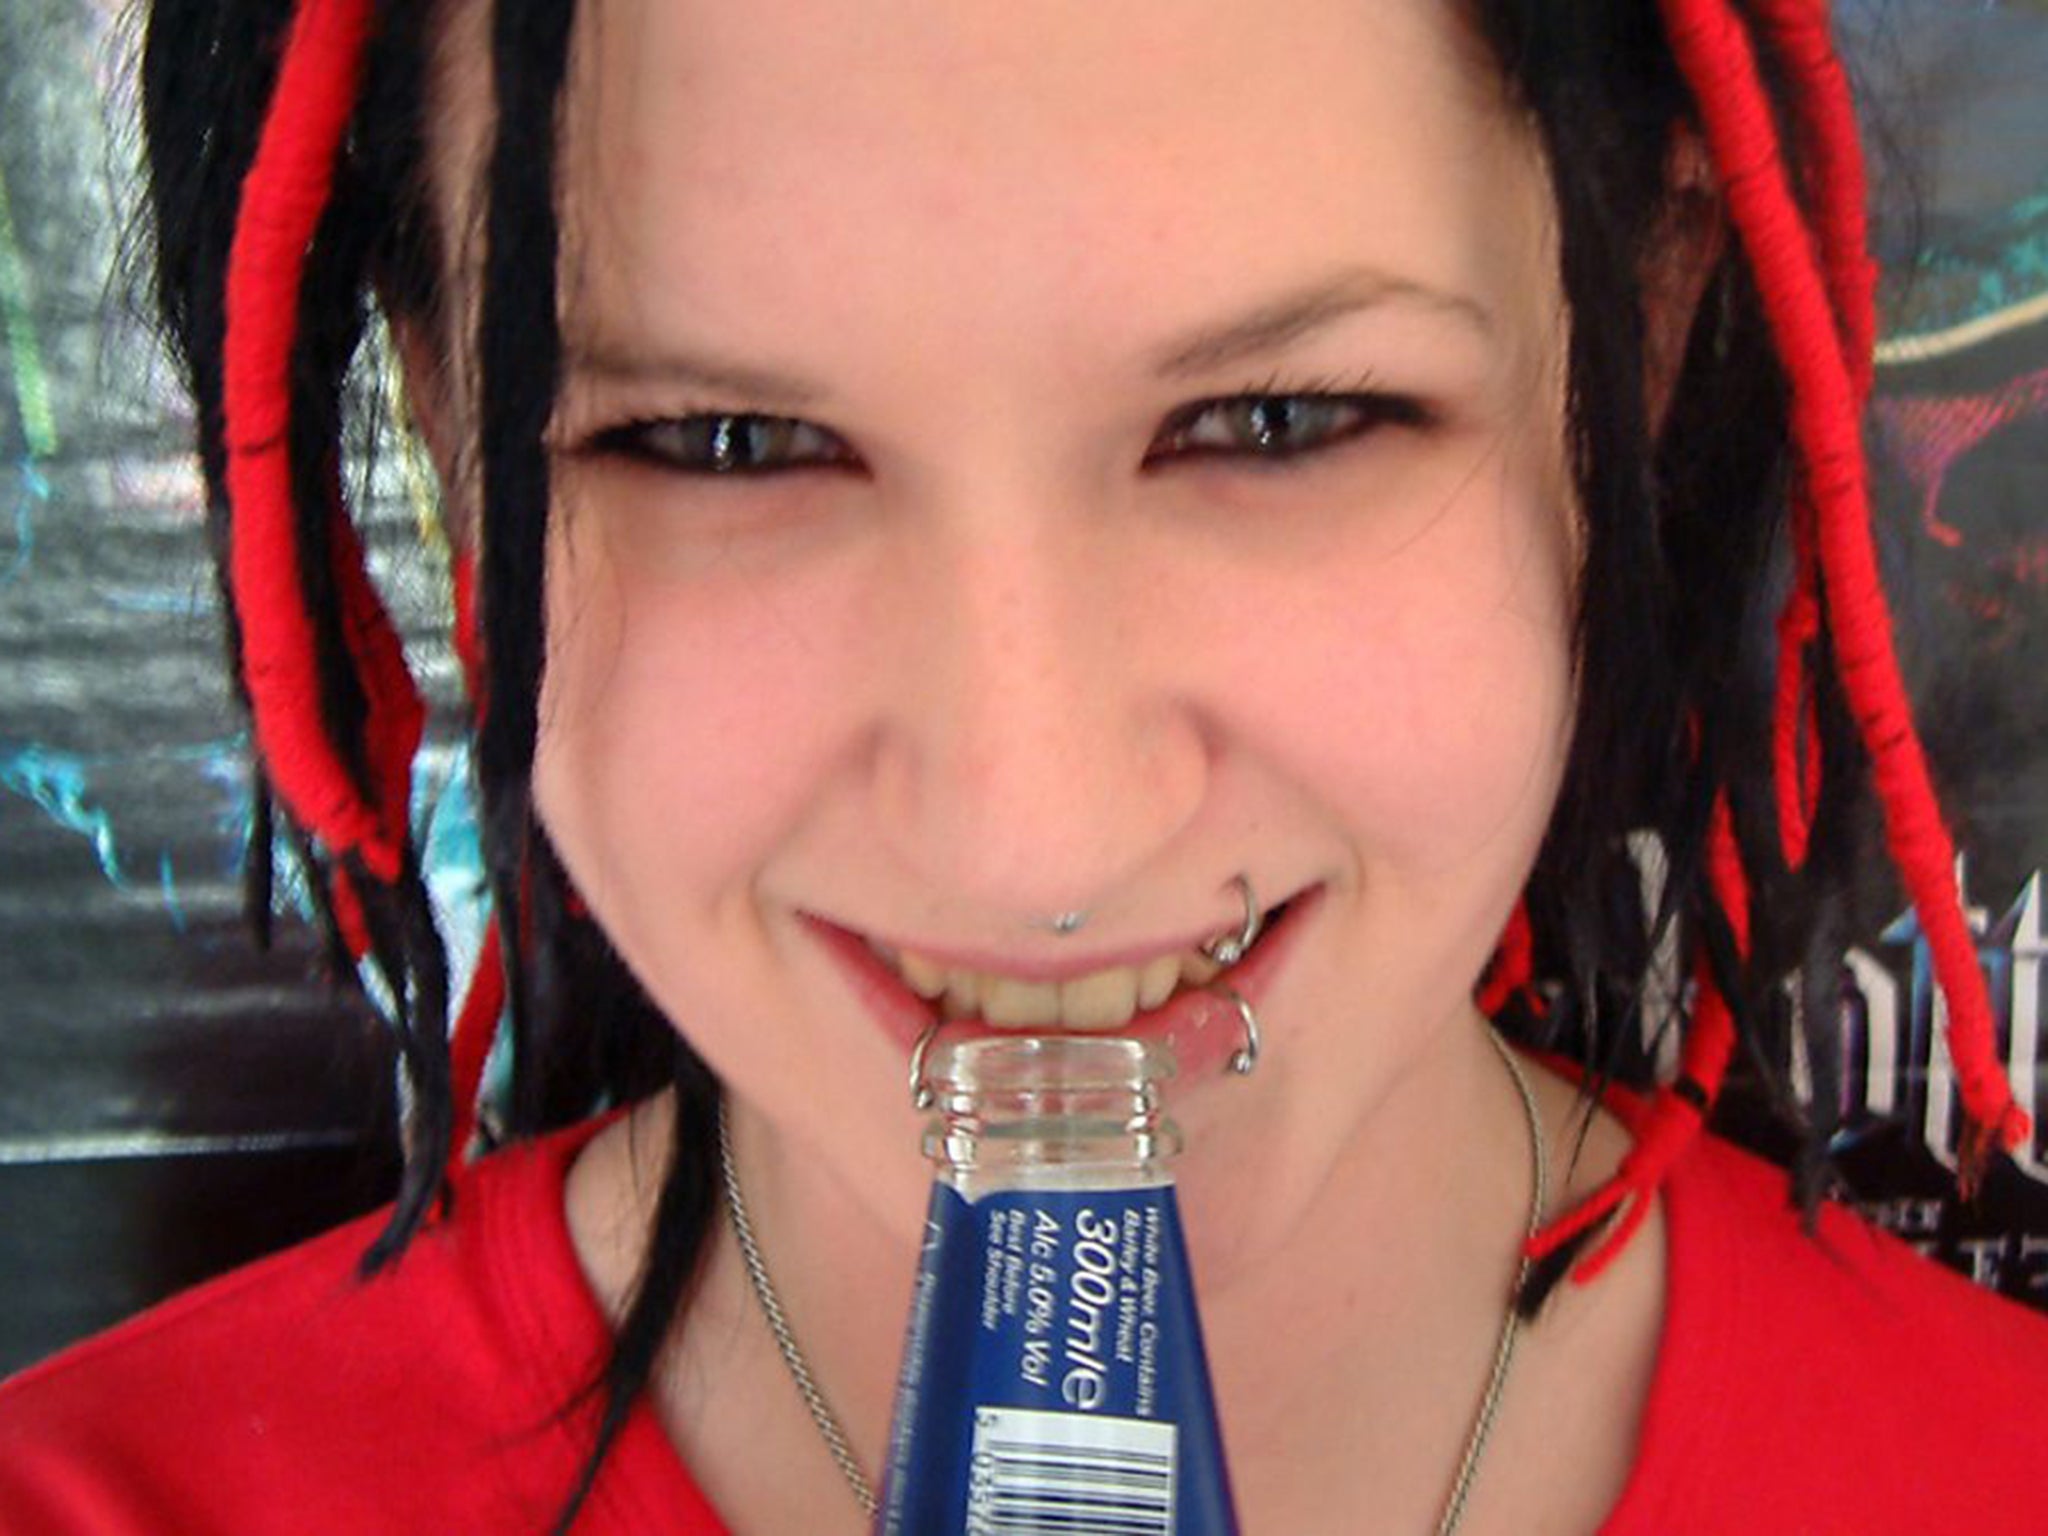 Sophie Lancaster was attacked, along with her boyfriend, in Stubbylee Park, Lancashire